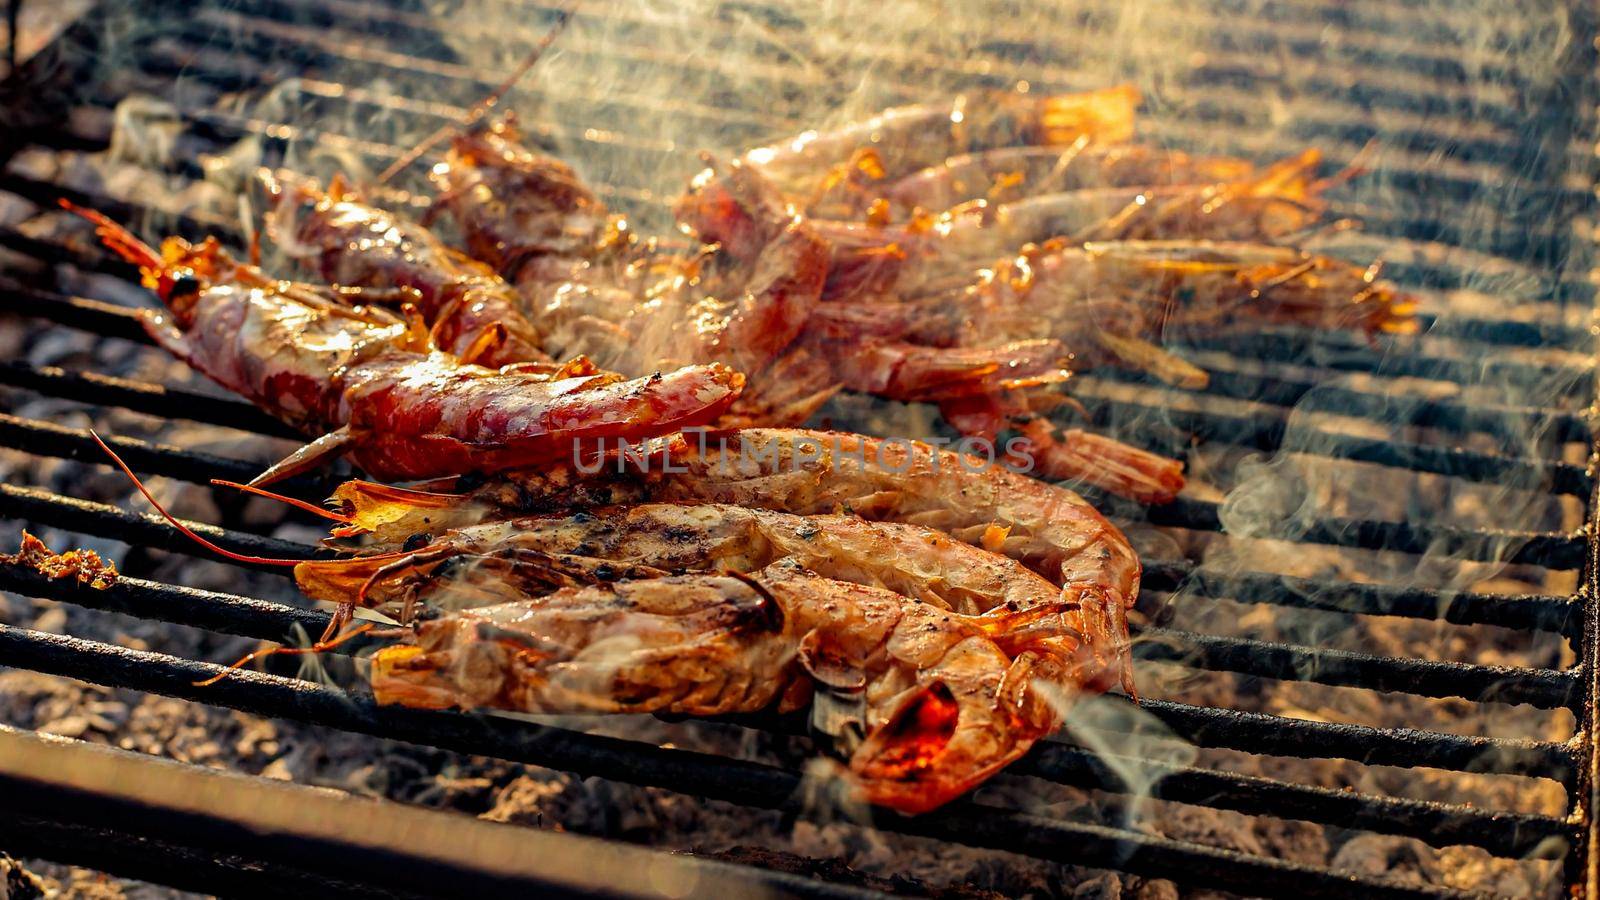 Grilled shrimp on a grill with charcoal grill. Close-up of shrimps being fried in oil pan